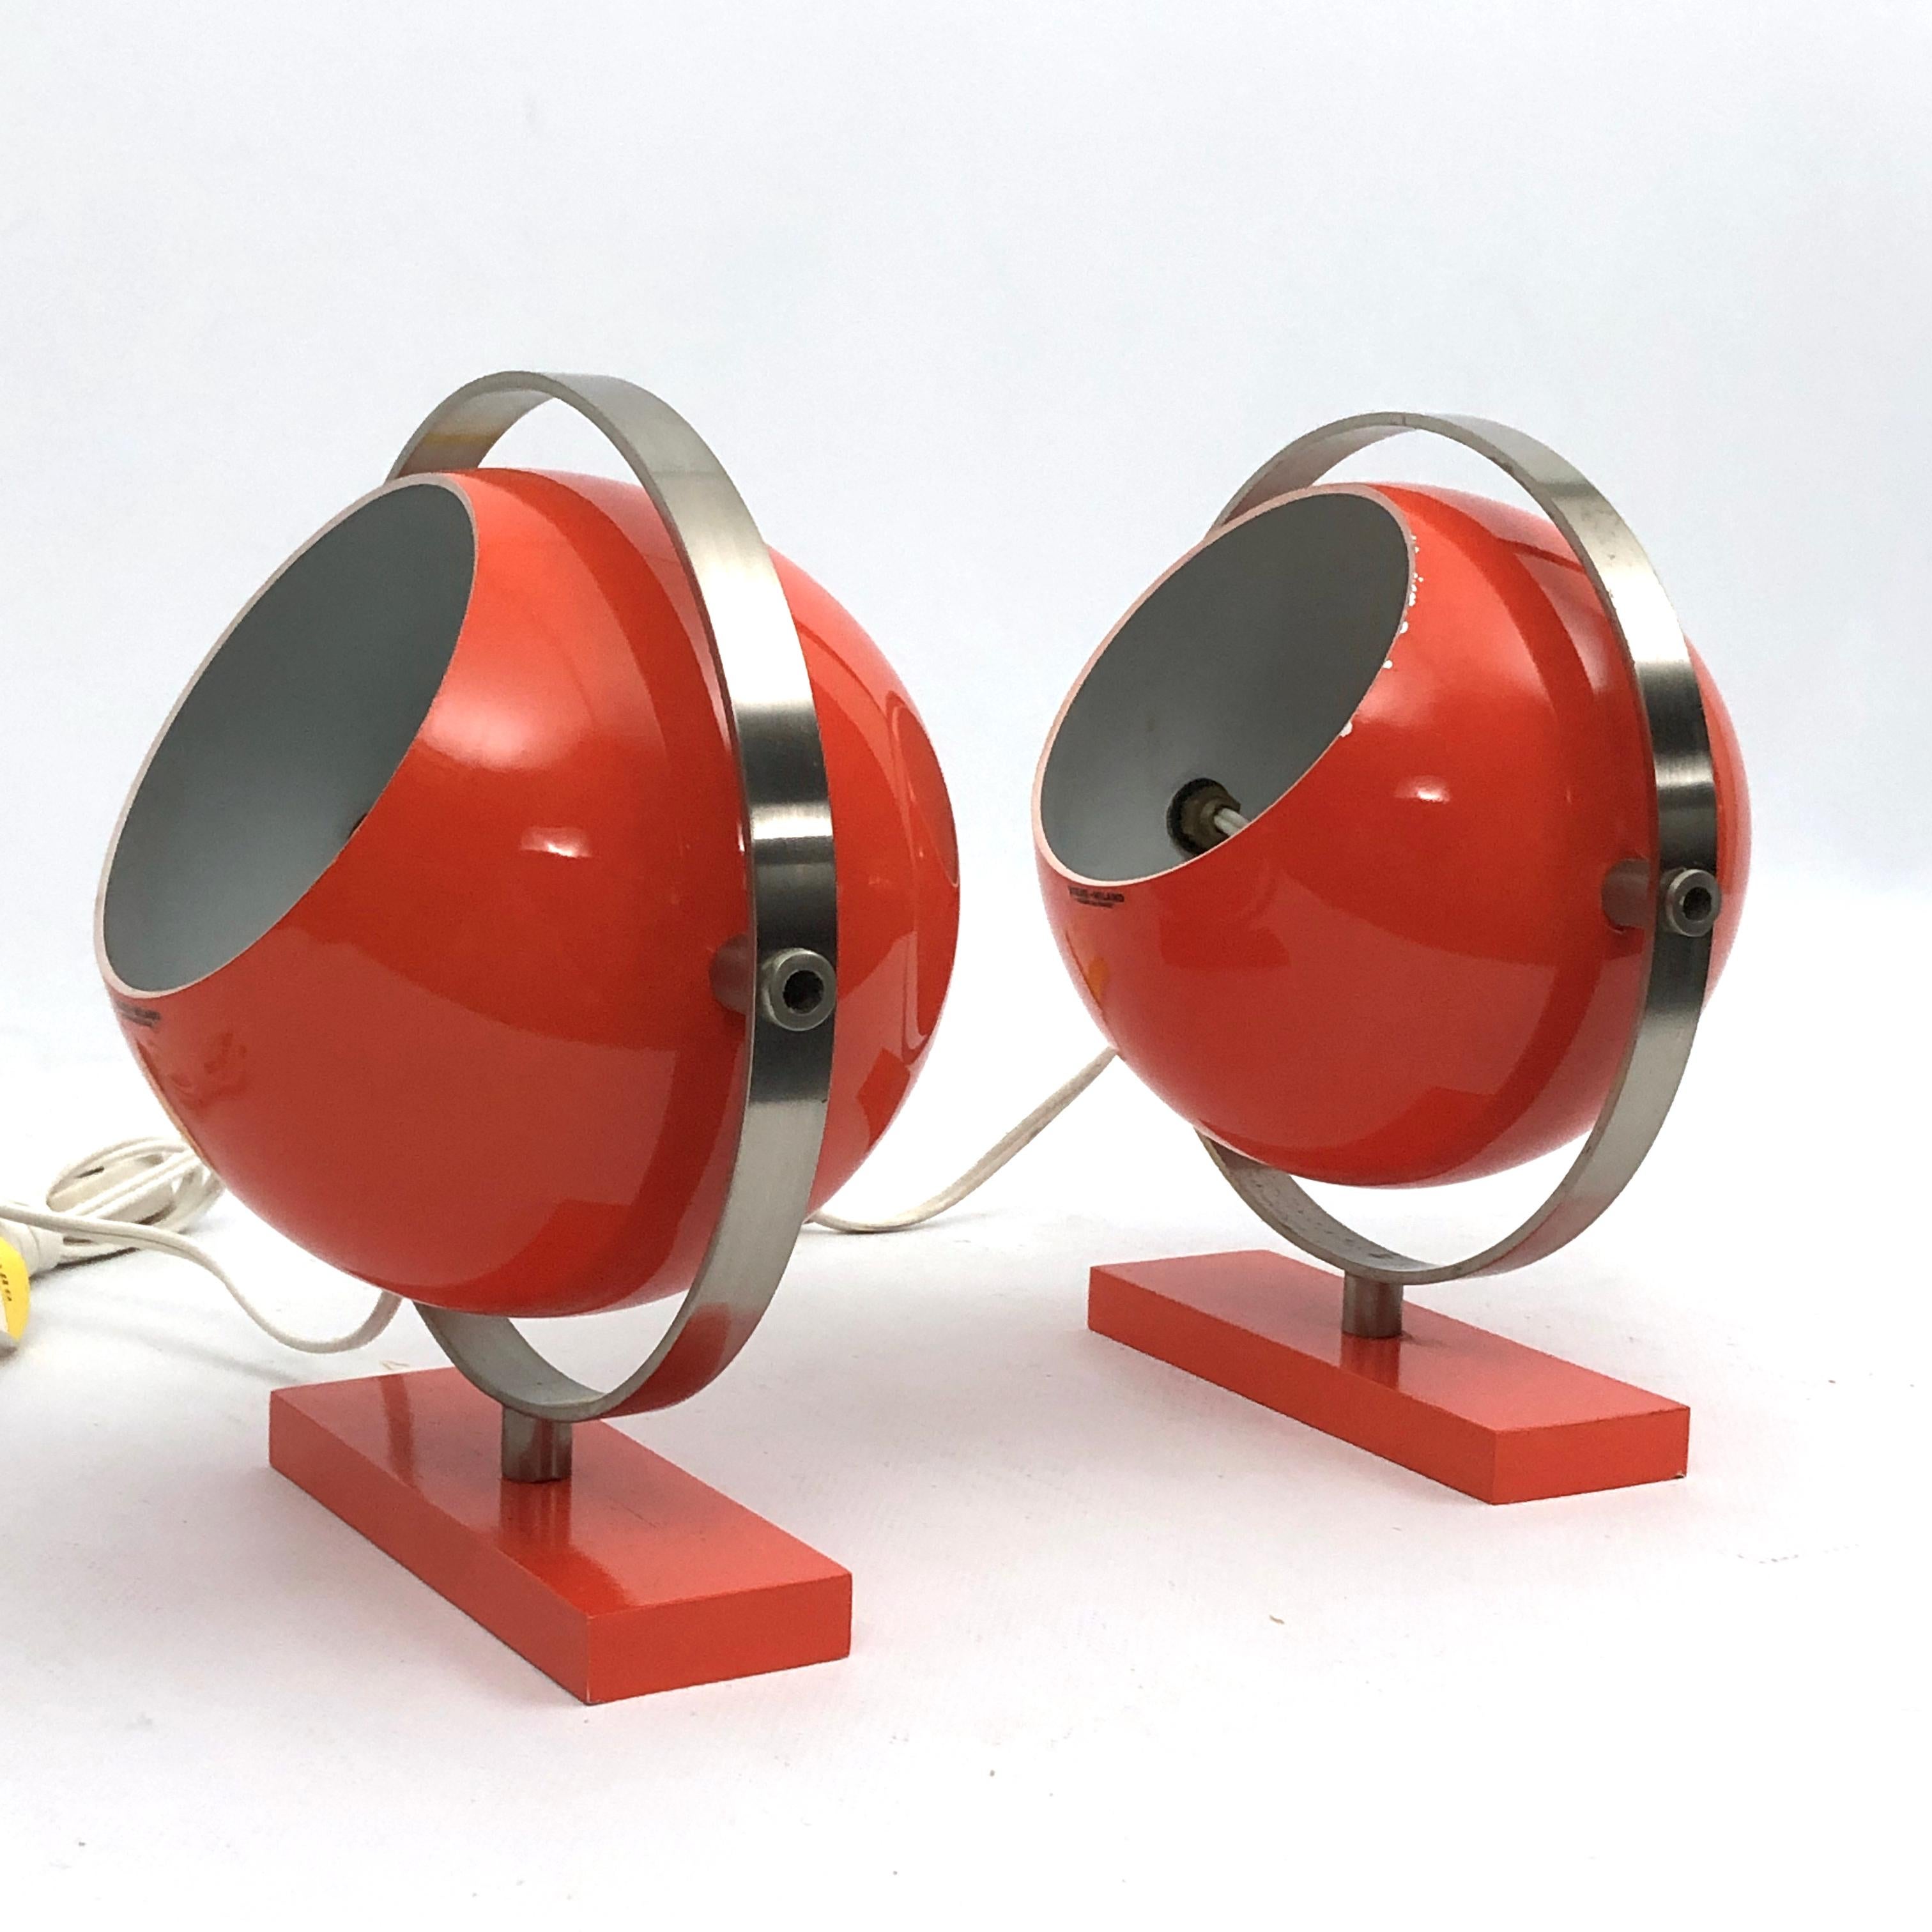 Stilux Milano Model Saba, Rare Orange Globe Table Lamps from 60s. Set of Two For Sale 7